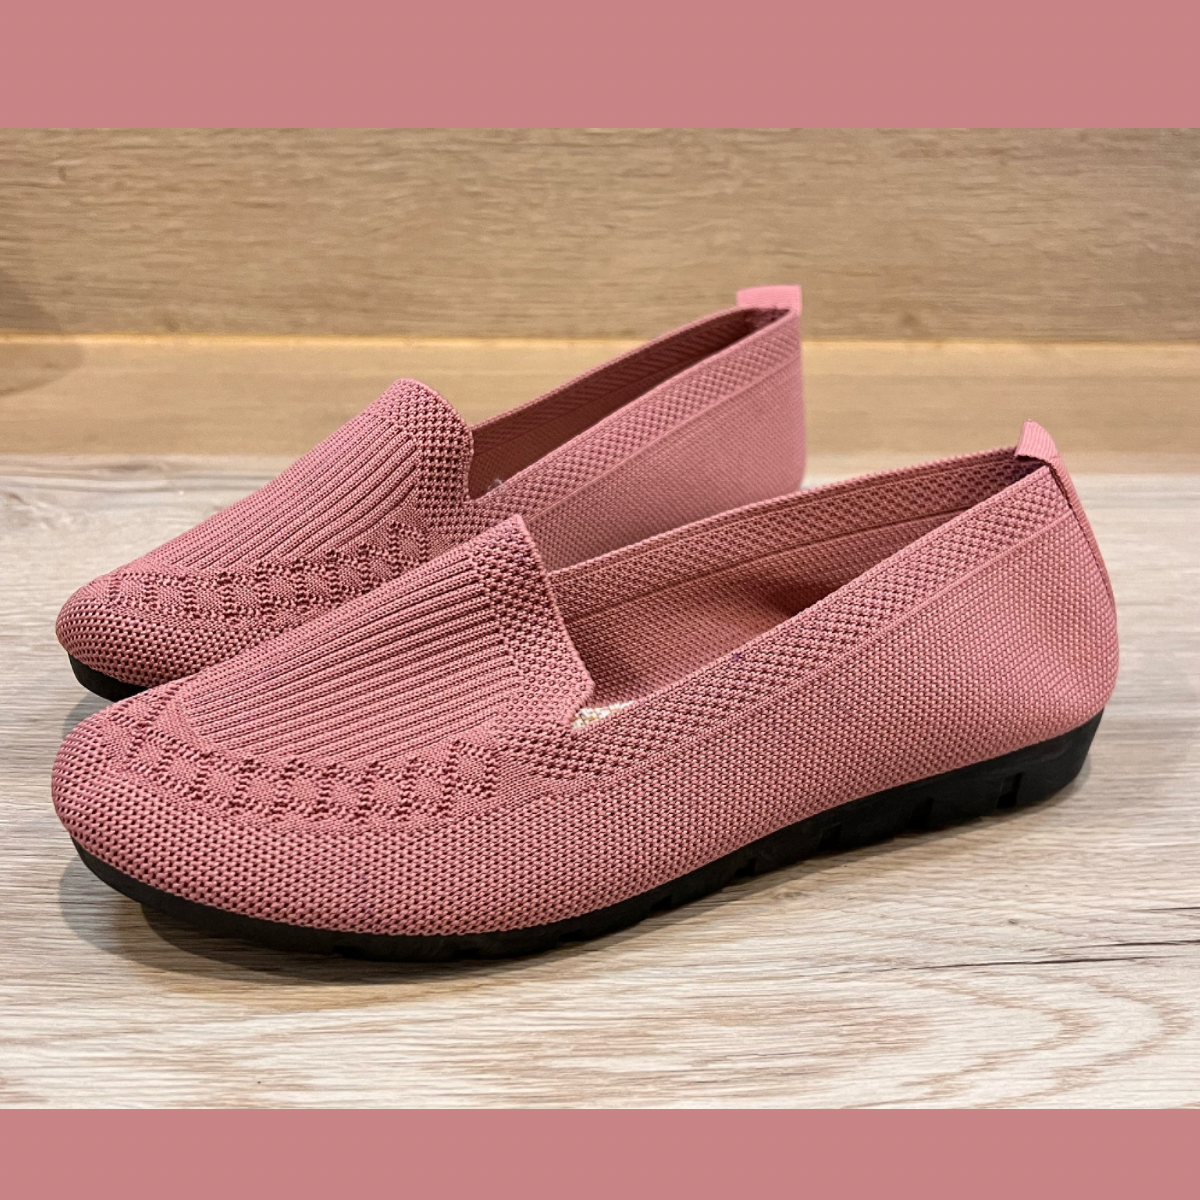 Soft Fabric Slip on lightweight loafers flat shoes